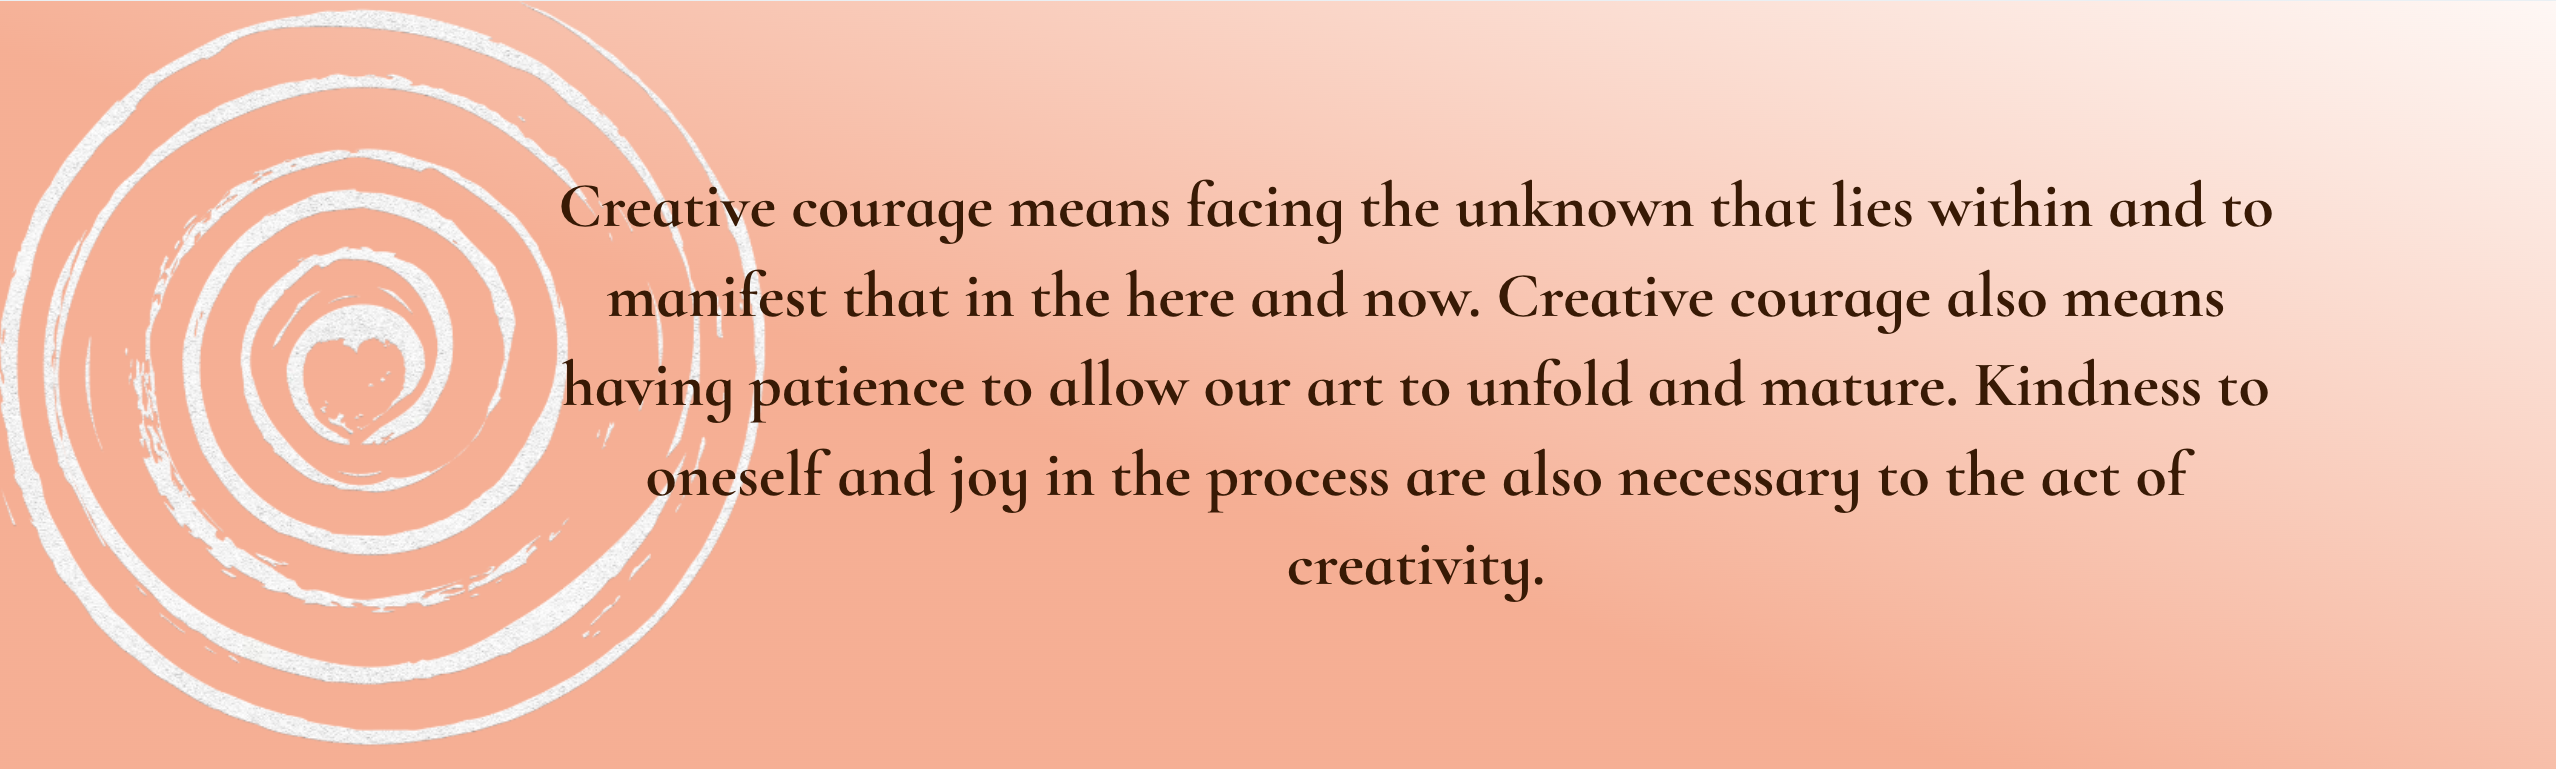  Creative courage means facing the unknown that lies within and to manifest that in the here and now. Creative courage also means having patience to allow our art to unfold and mature. Kindness to oneself and joy in the process are also necessary to the act of creativity.